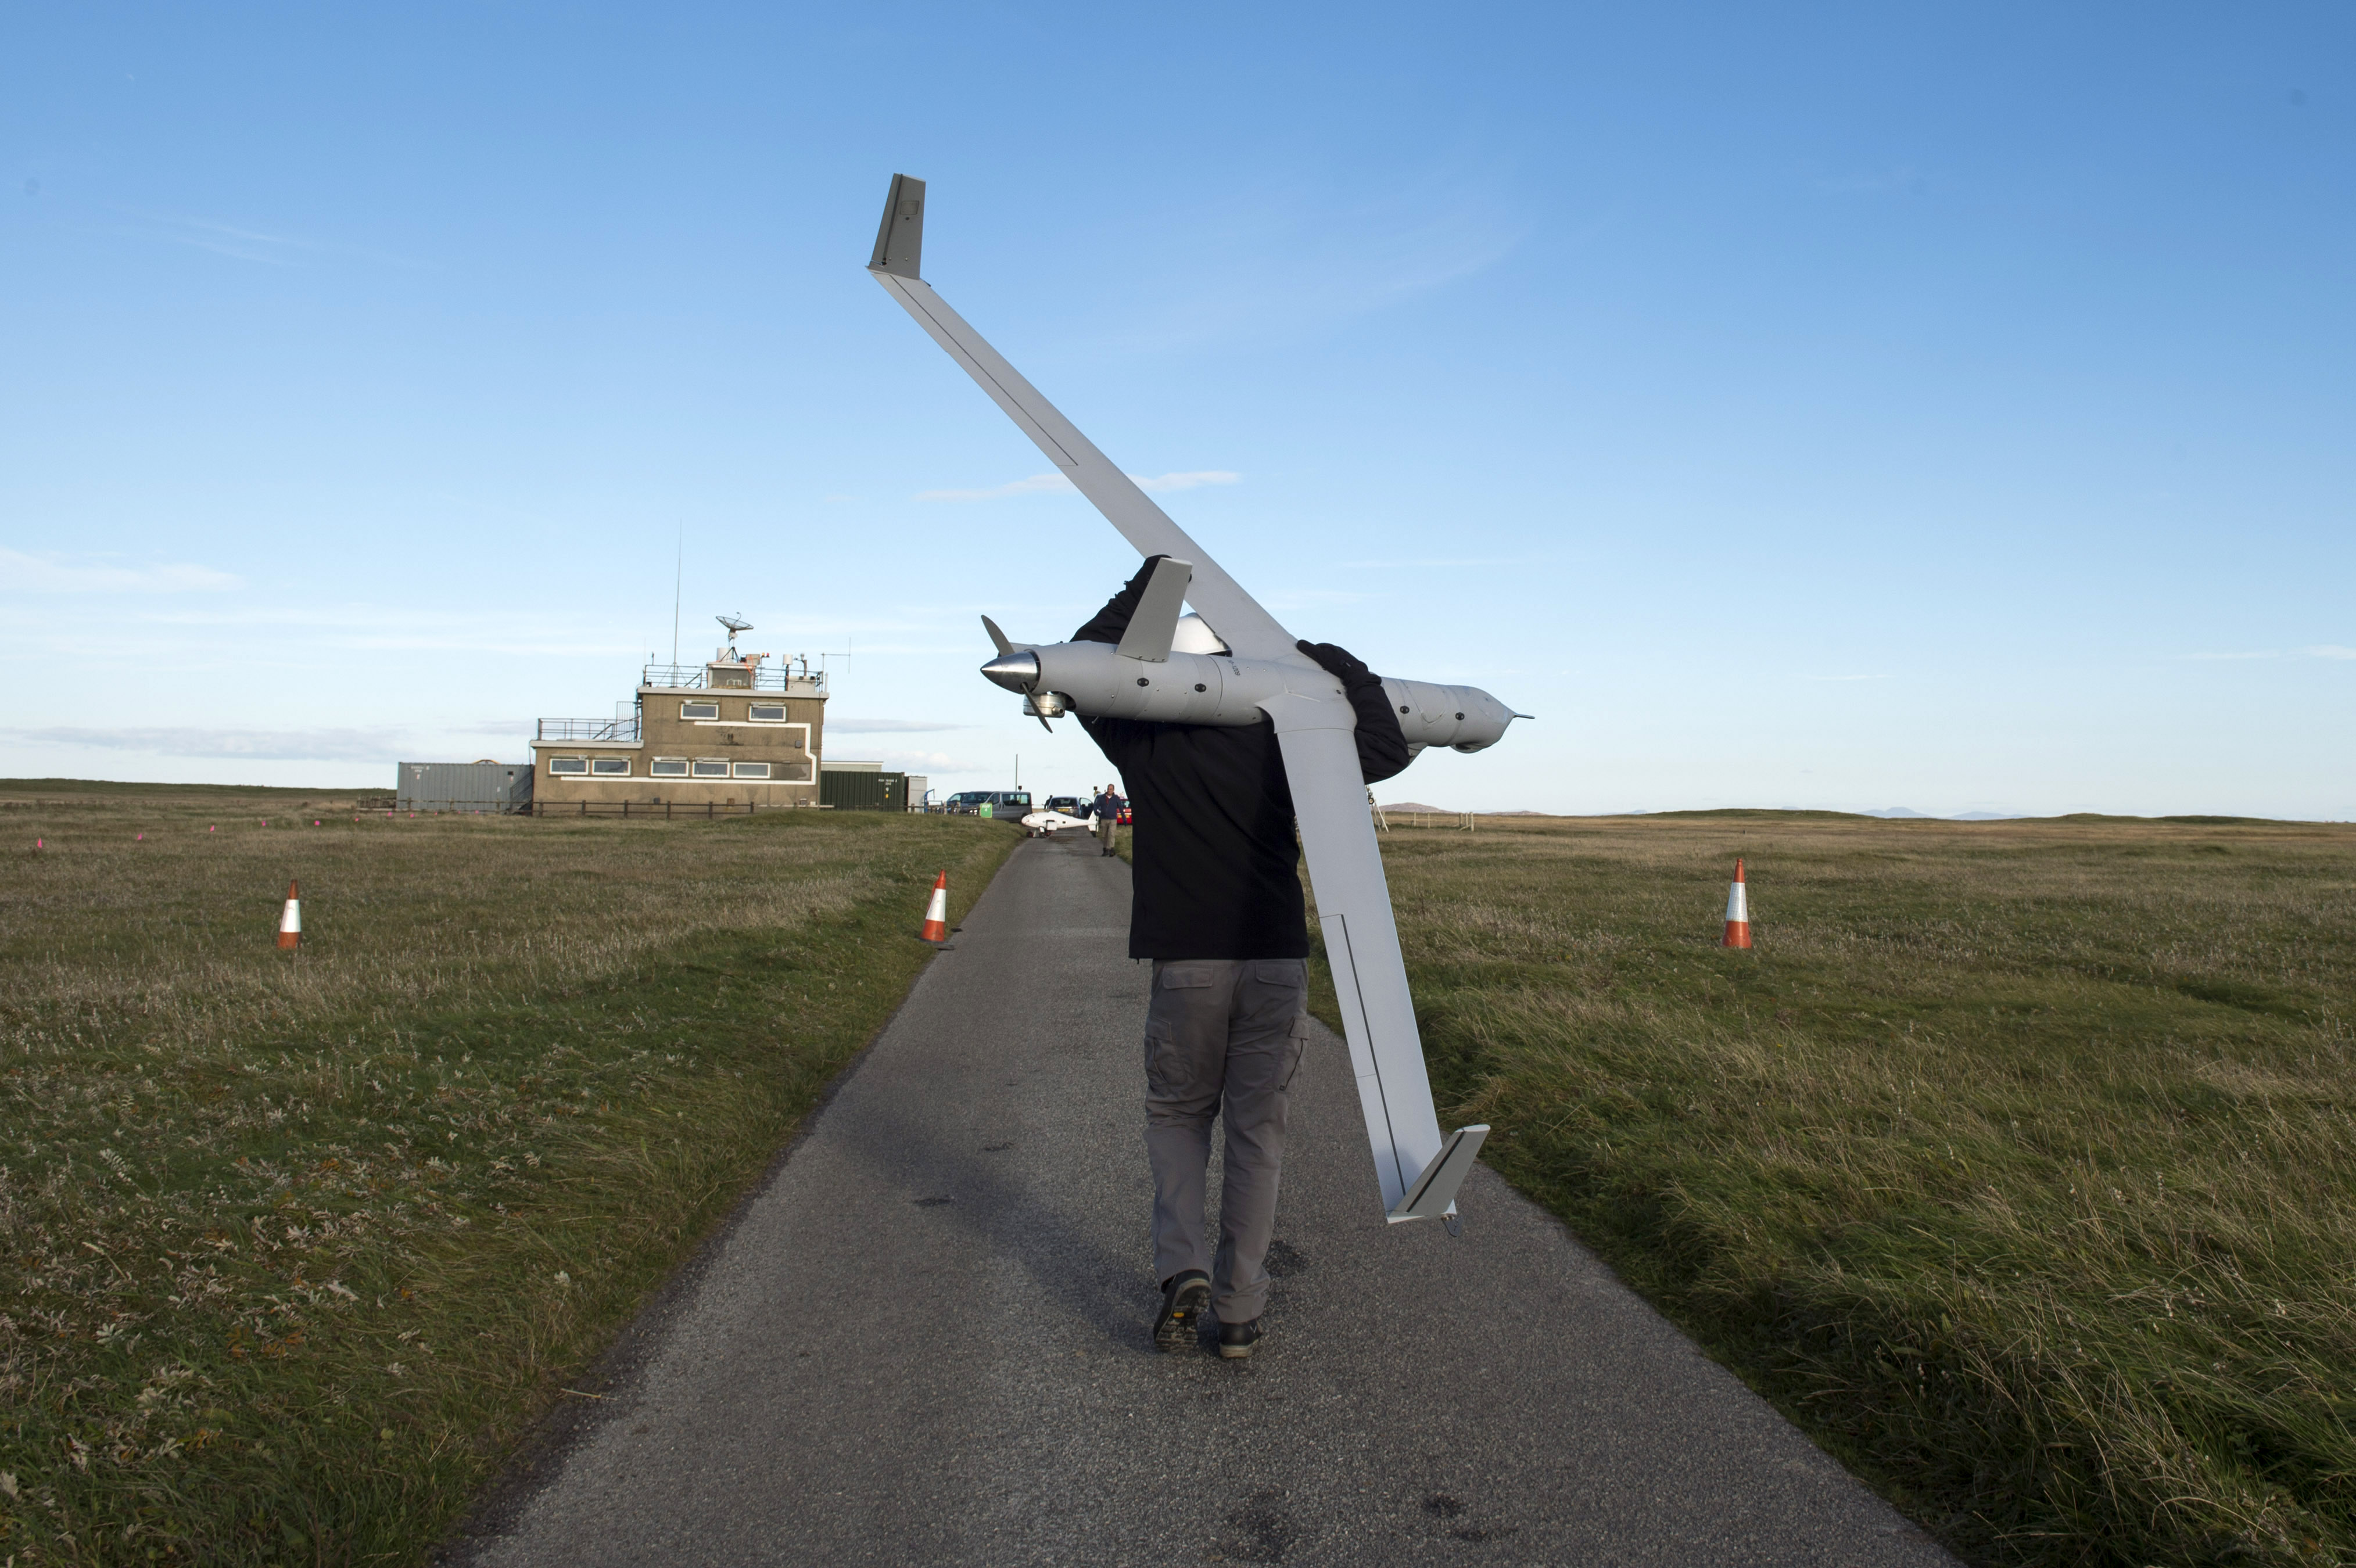 Scott Wiltermood, INSITU demonstration team manager, carries an MQ-27A Scan Eagle unmanned aerial vehicle after landing at Benbecula Rangehead on Oct. 10, 2016. More than 40 international participants from other navies, industry, academia and research laboratories are in Scotland conducting the first-ever Unmanned Warrior, a research and training exercise designed to test and demonstrate the latest in autonomous naval technologies while simultaneously strengthening international interoperability. Unmanned Warrior is part of Joint Warrior, a semiannual United Kingdom-led training exercise designed to provide NATO and allied forces with a unique multi-warfare environment in which to prepare for global operations. US Navy photo.